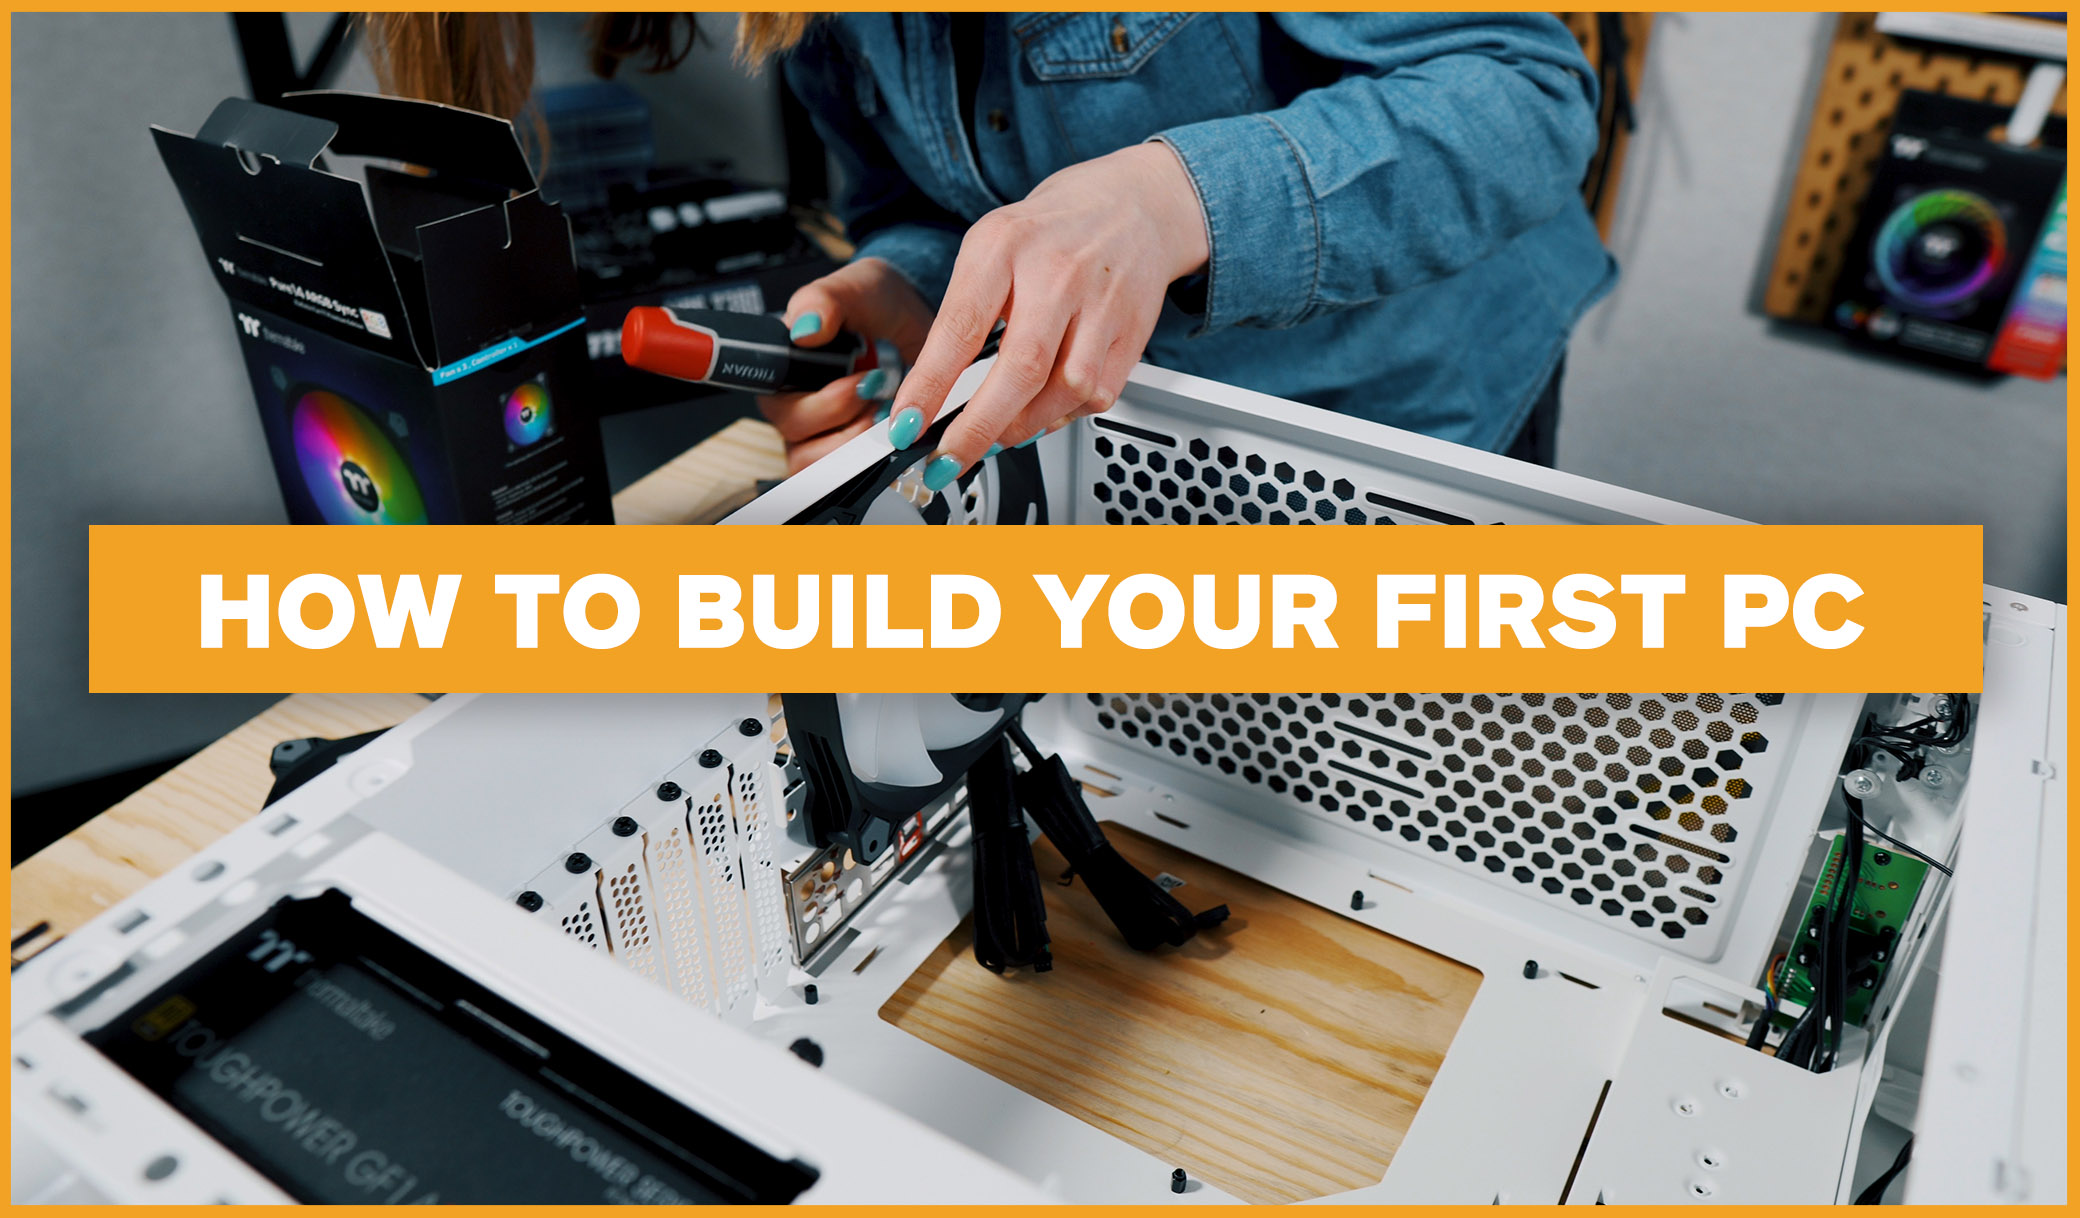 How to build your first PC